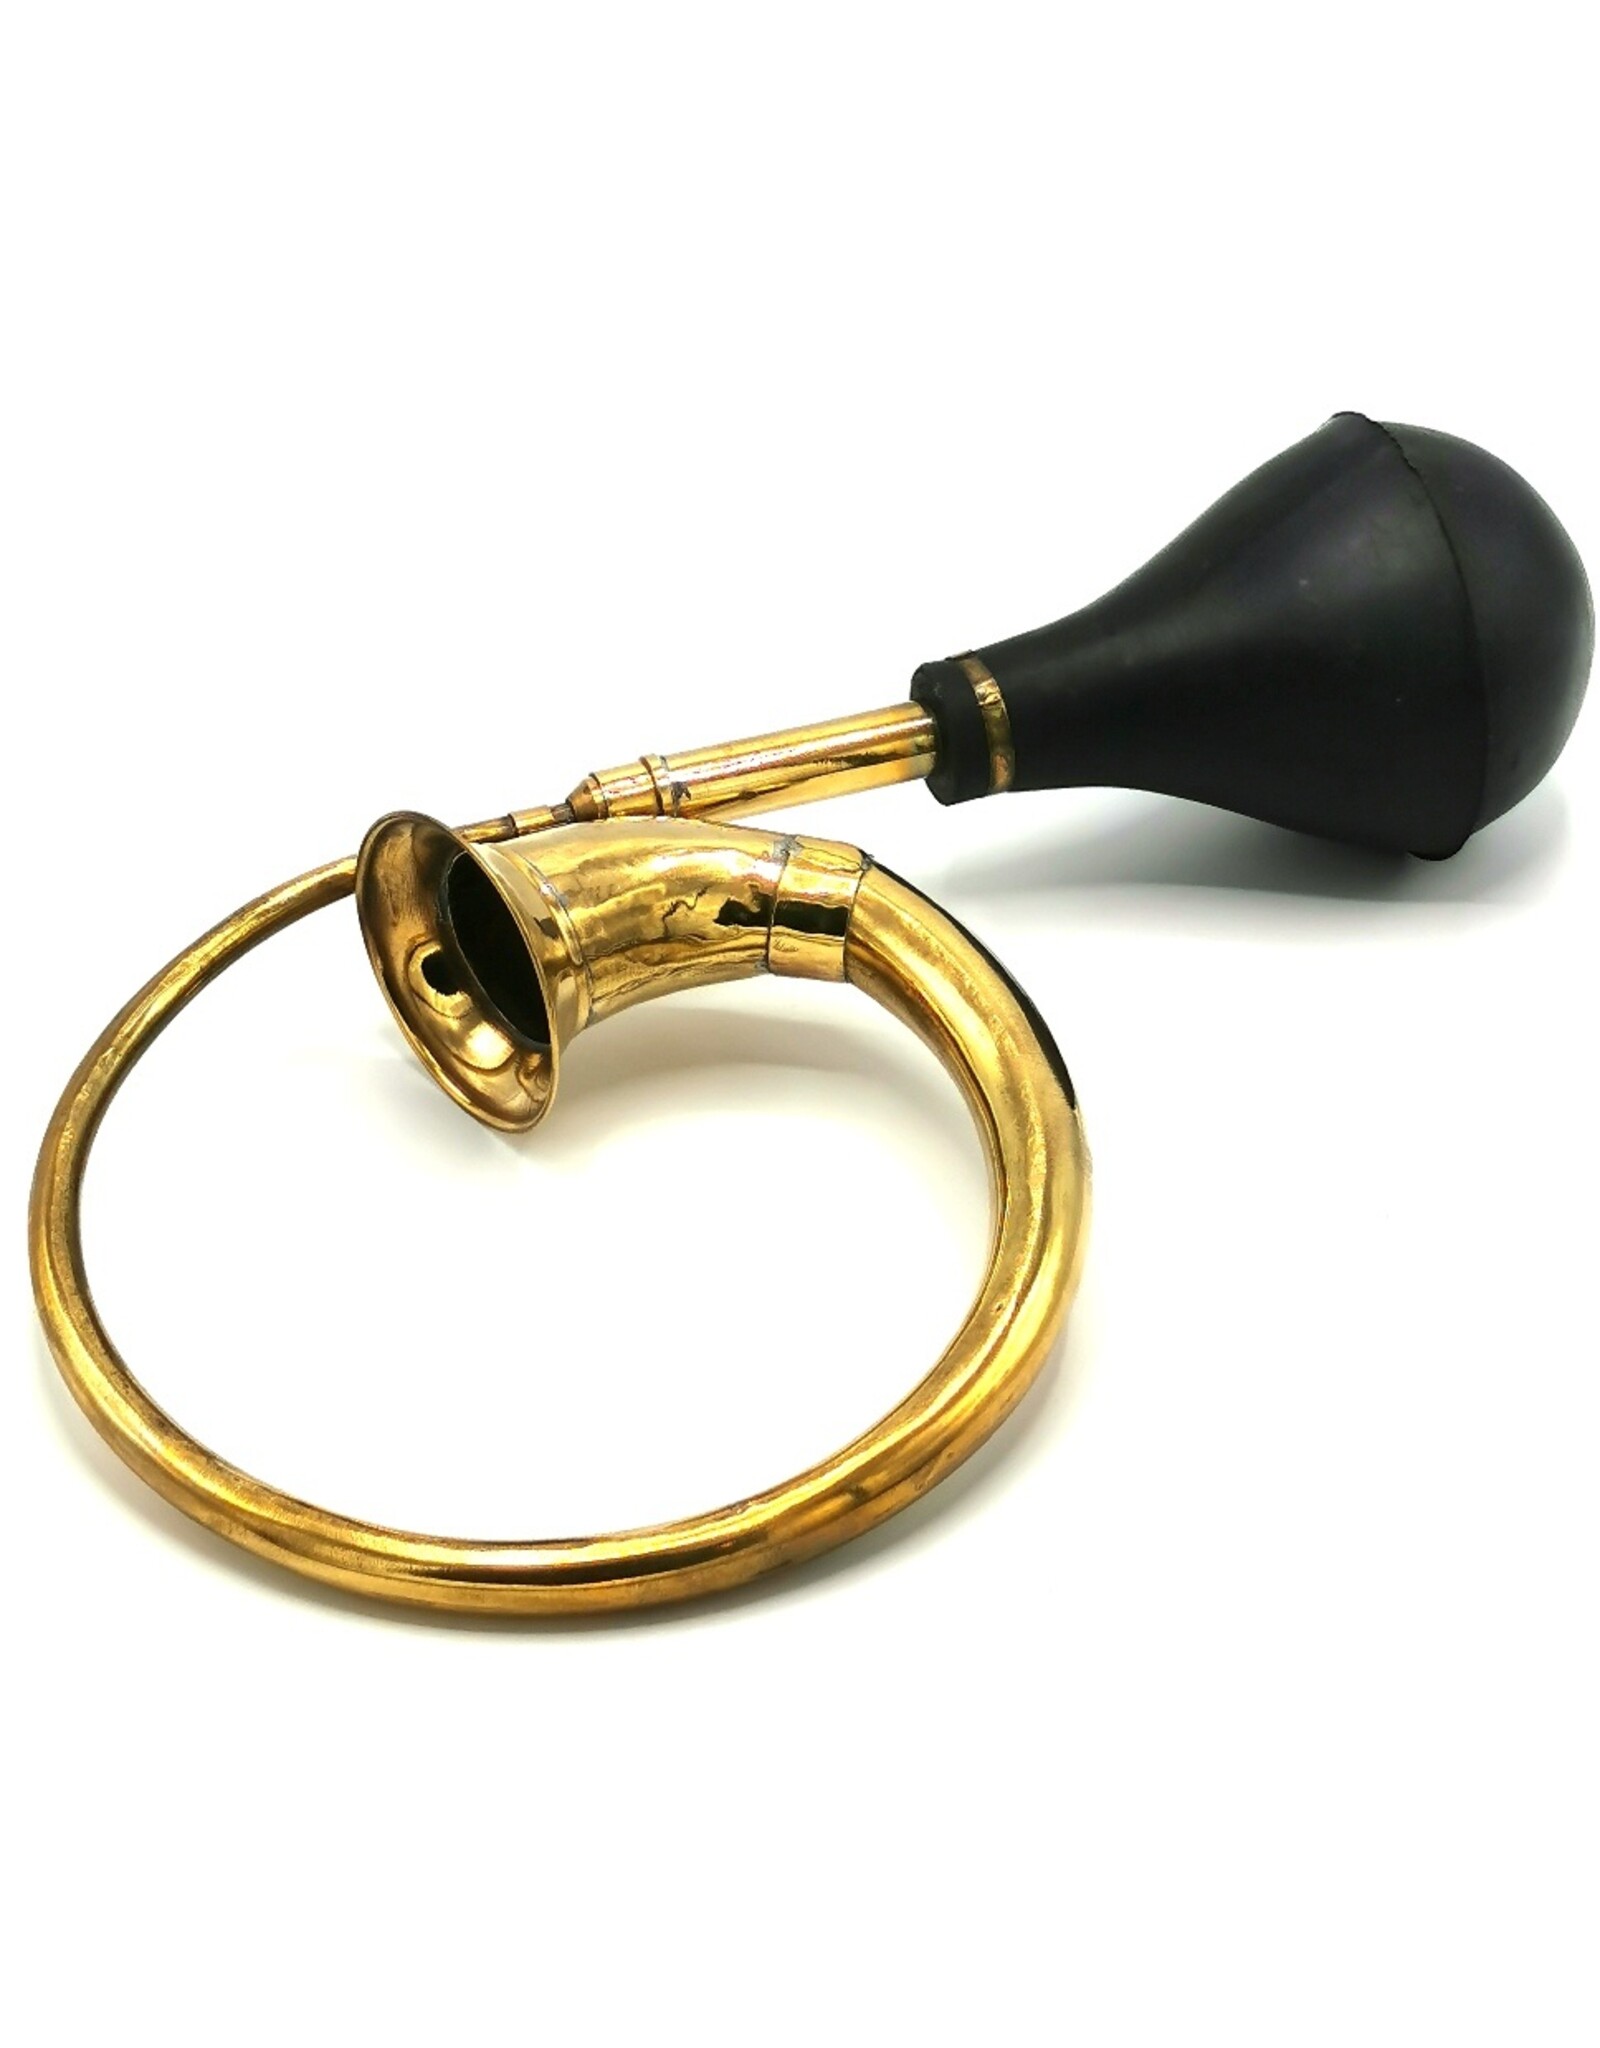 Trukado Giftware and Collectables - Horn - Taxi Claxon Big Ring Brass